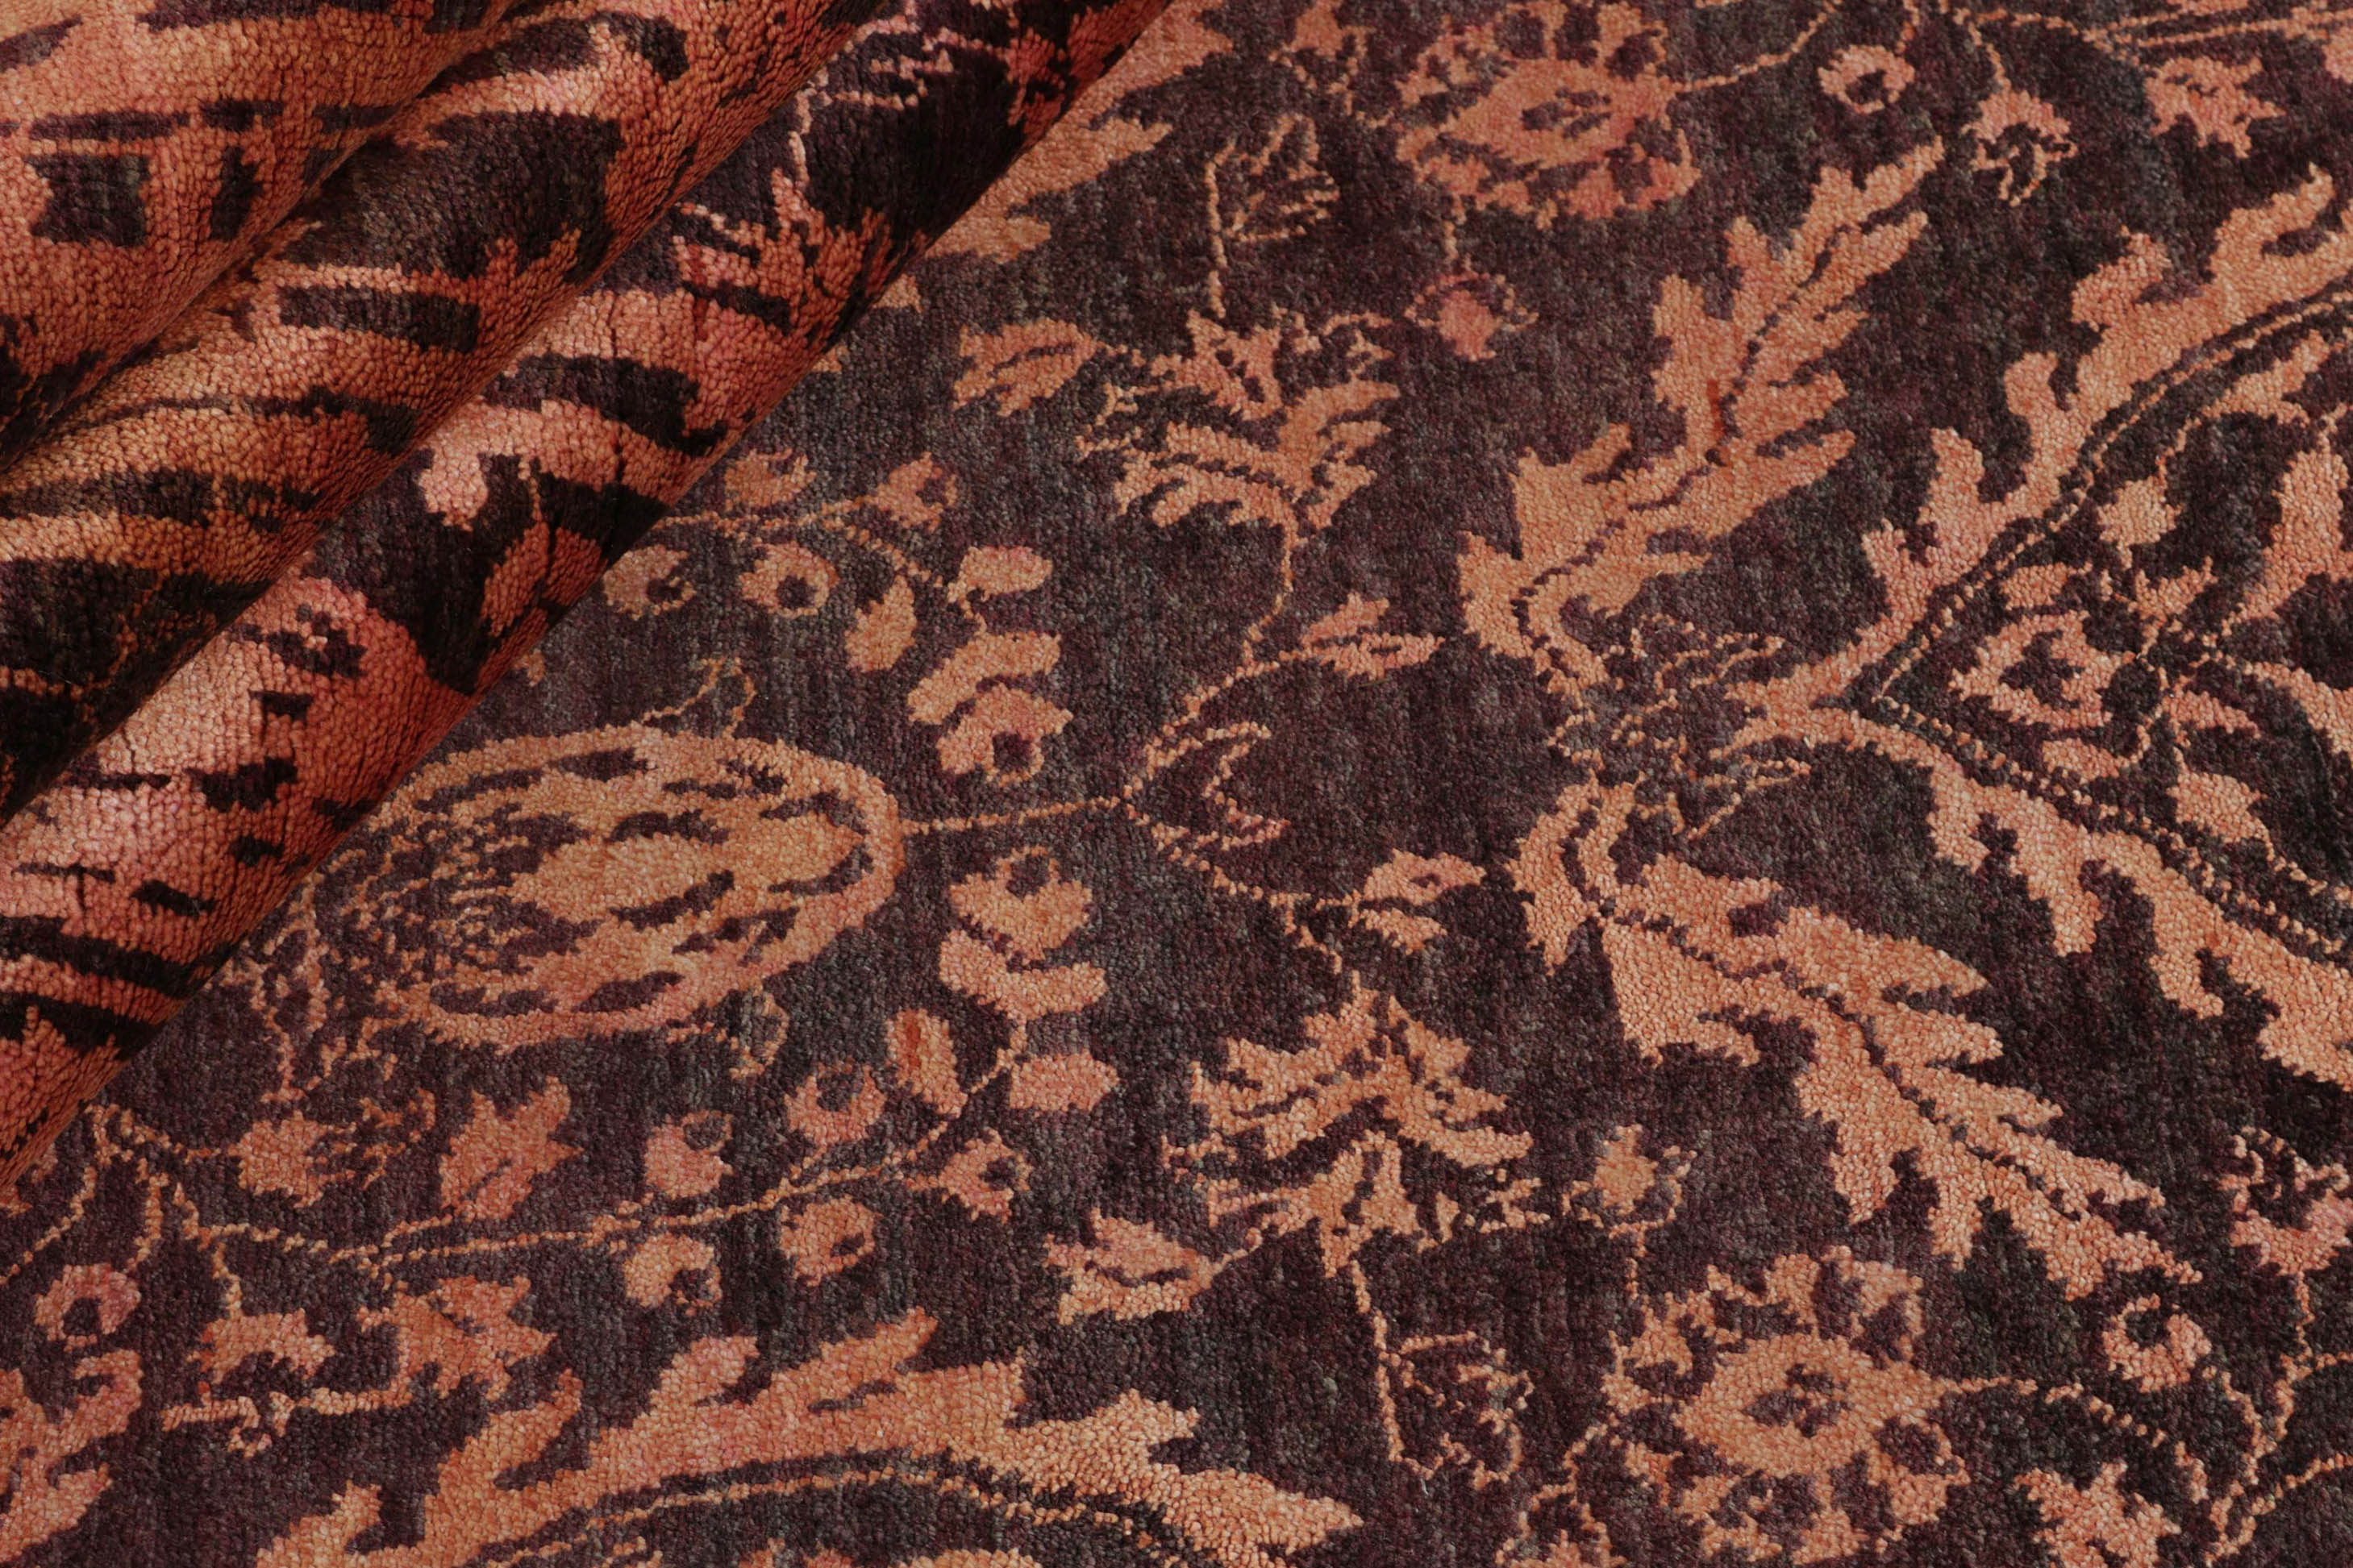 Authentic oriental rug with a damask pattern in red